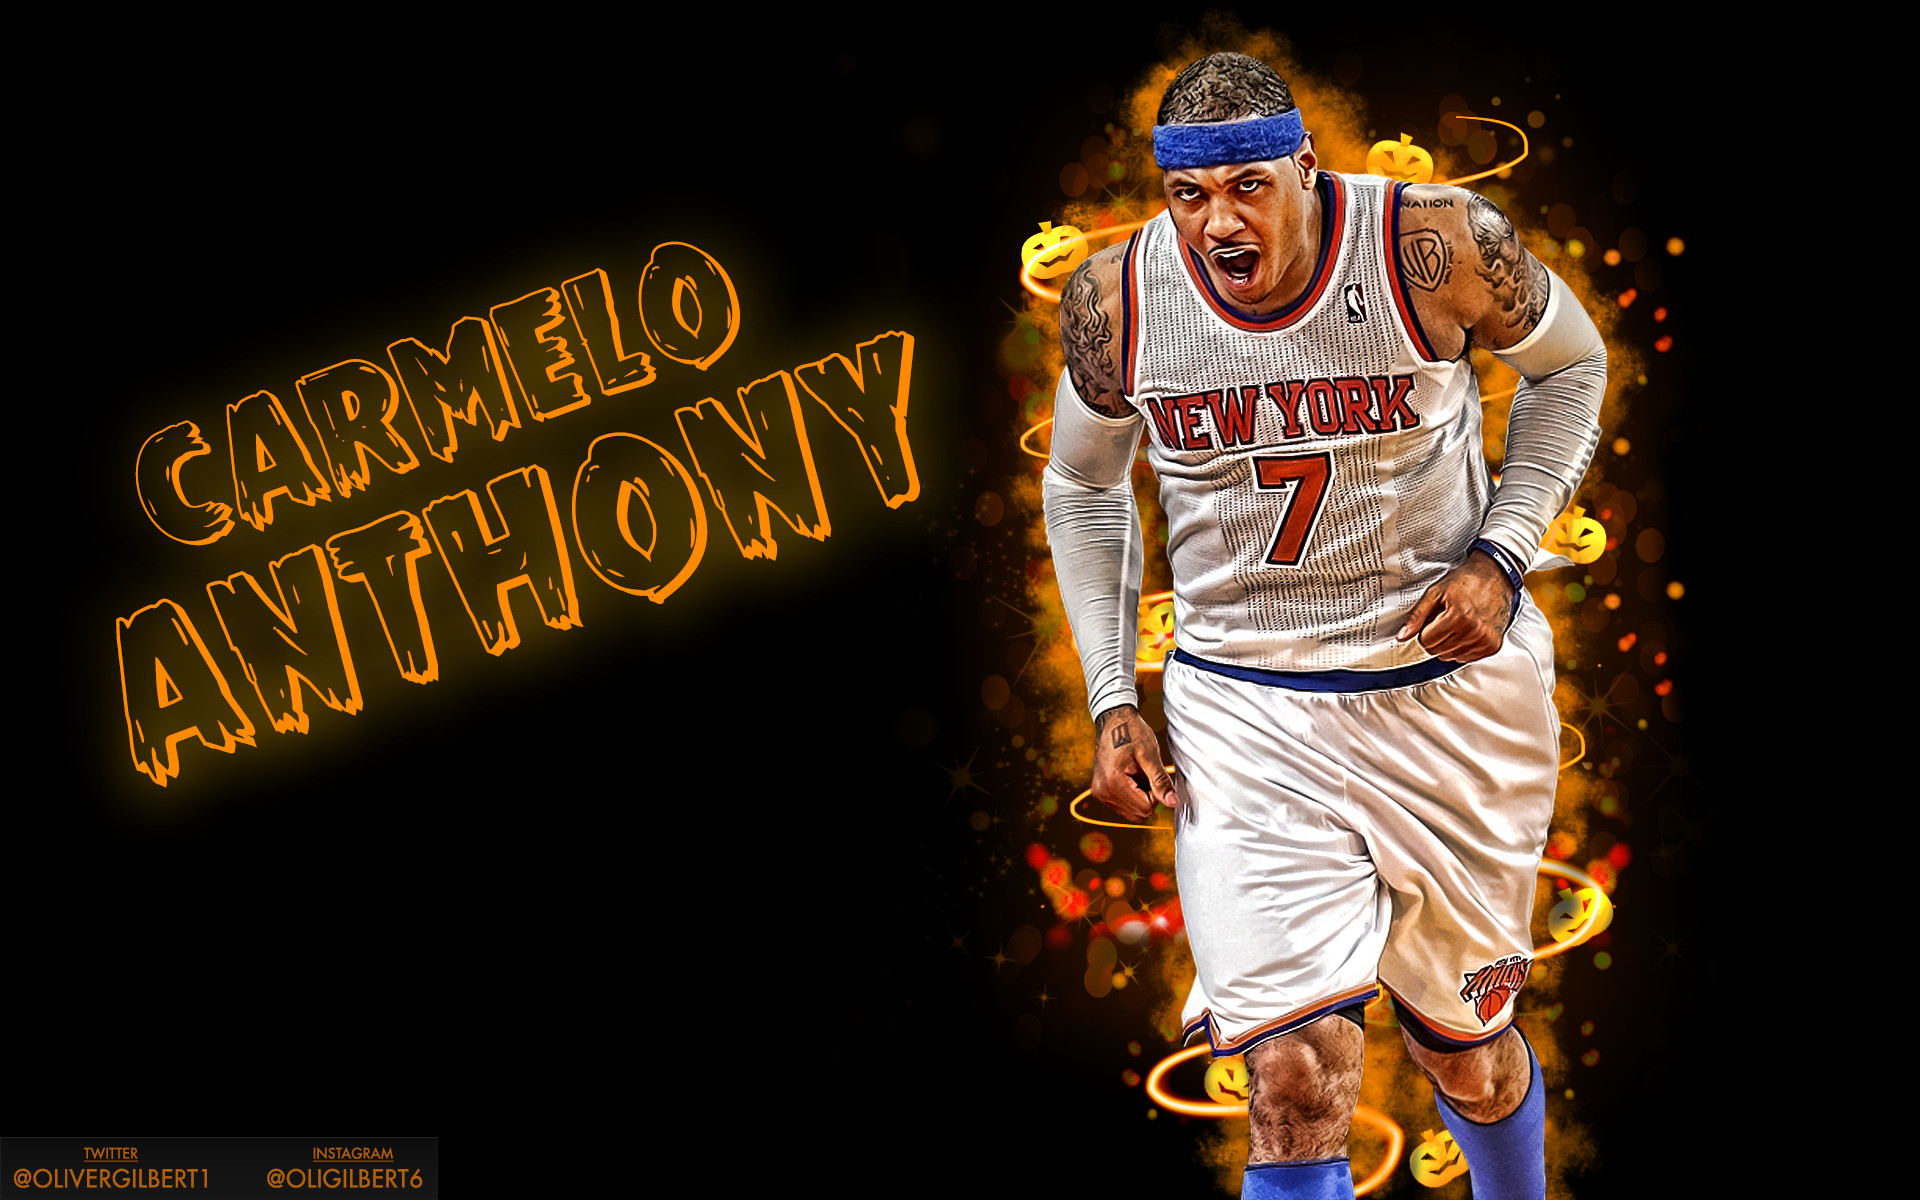 1920x1200 Carmelo Anthony Halloween Wallpaper by Hecziaa Carmelo Anthony Halloween  Wallpaper by Hecziaa